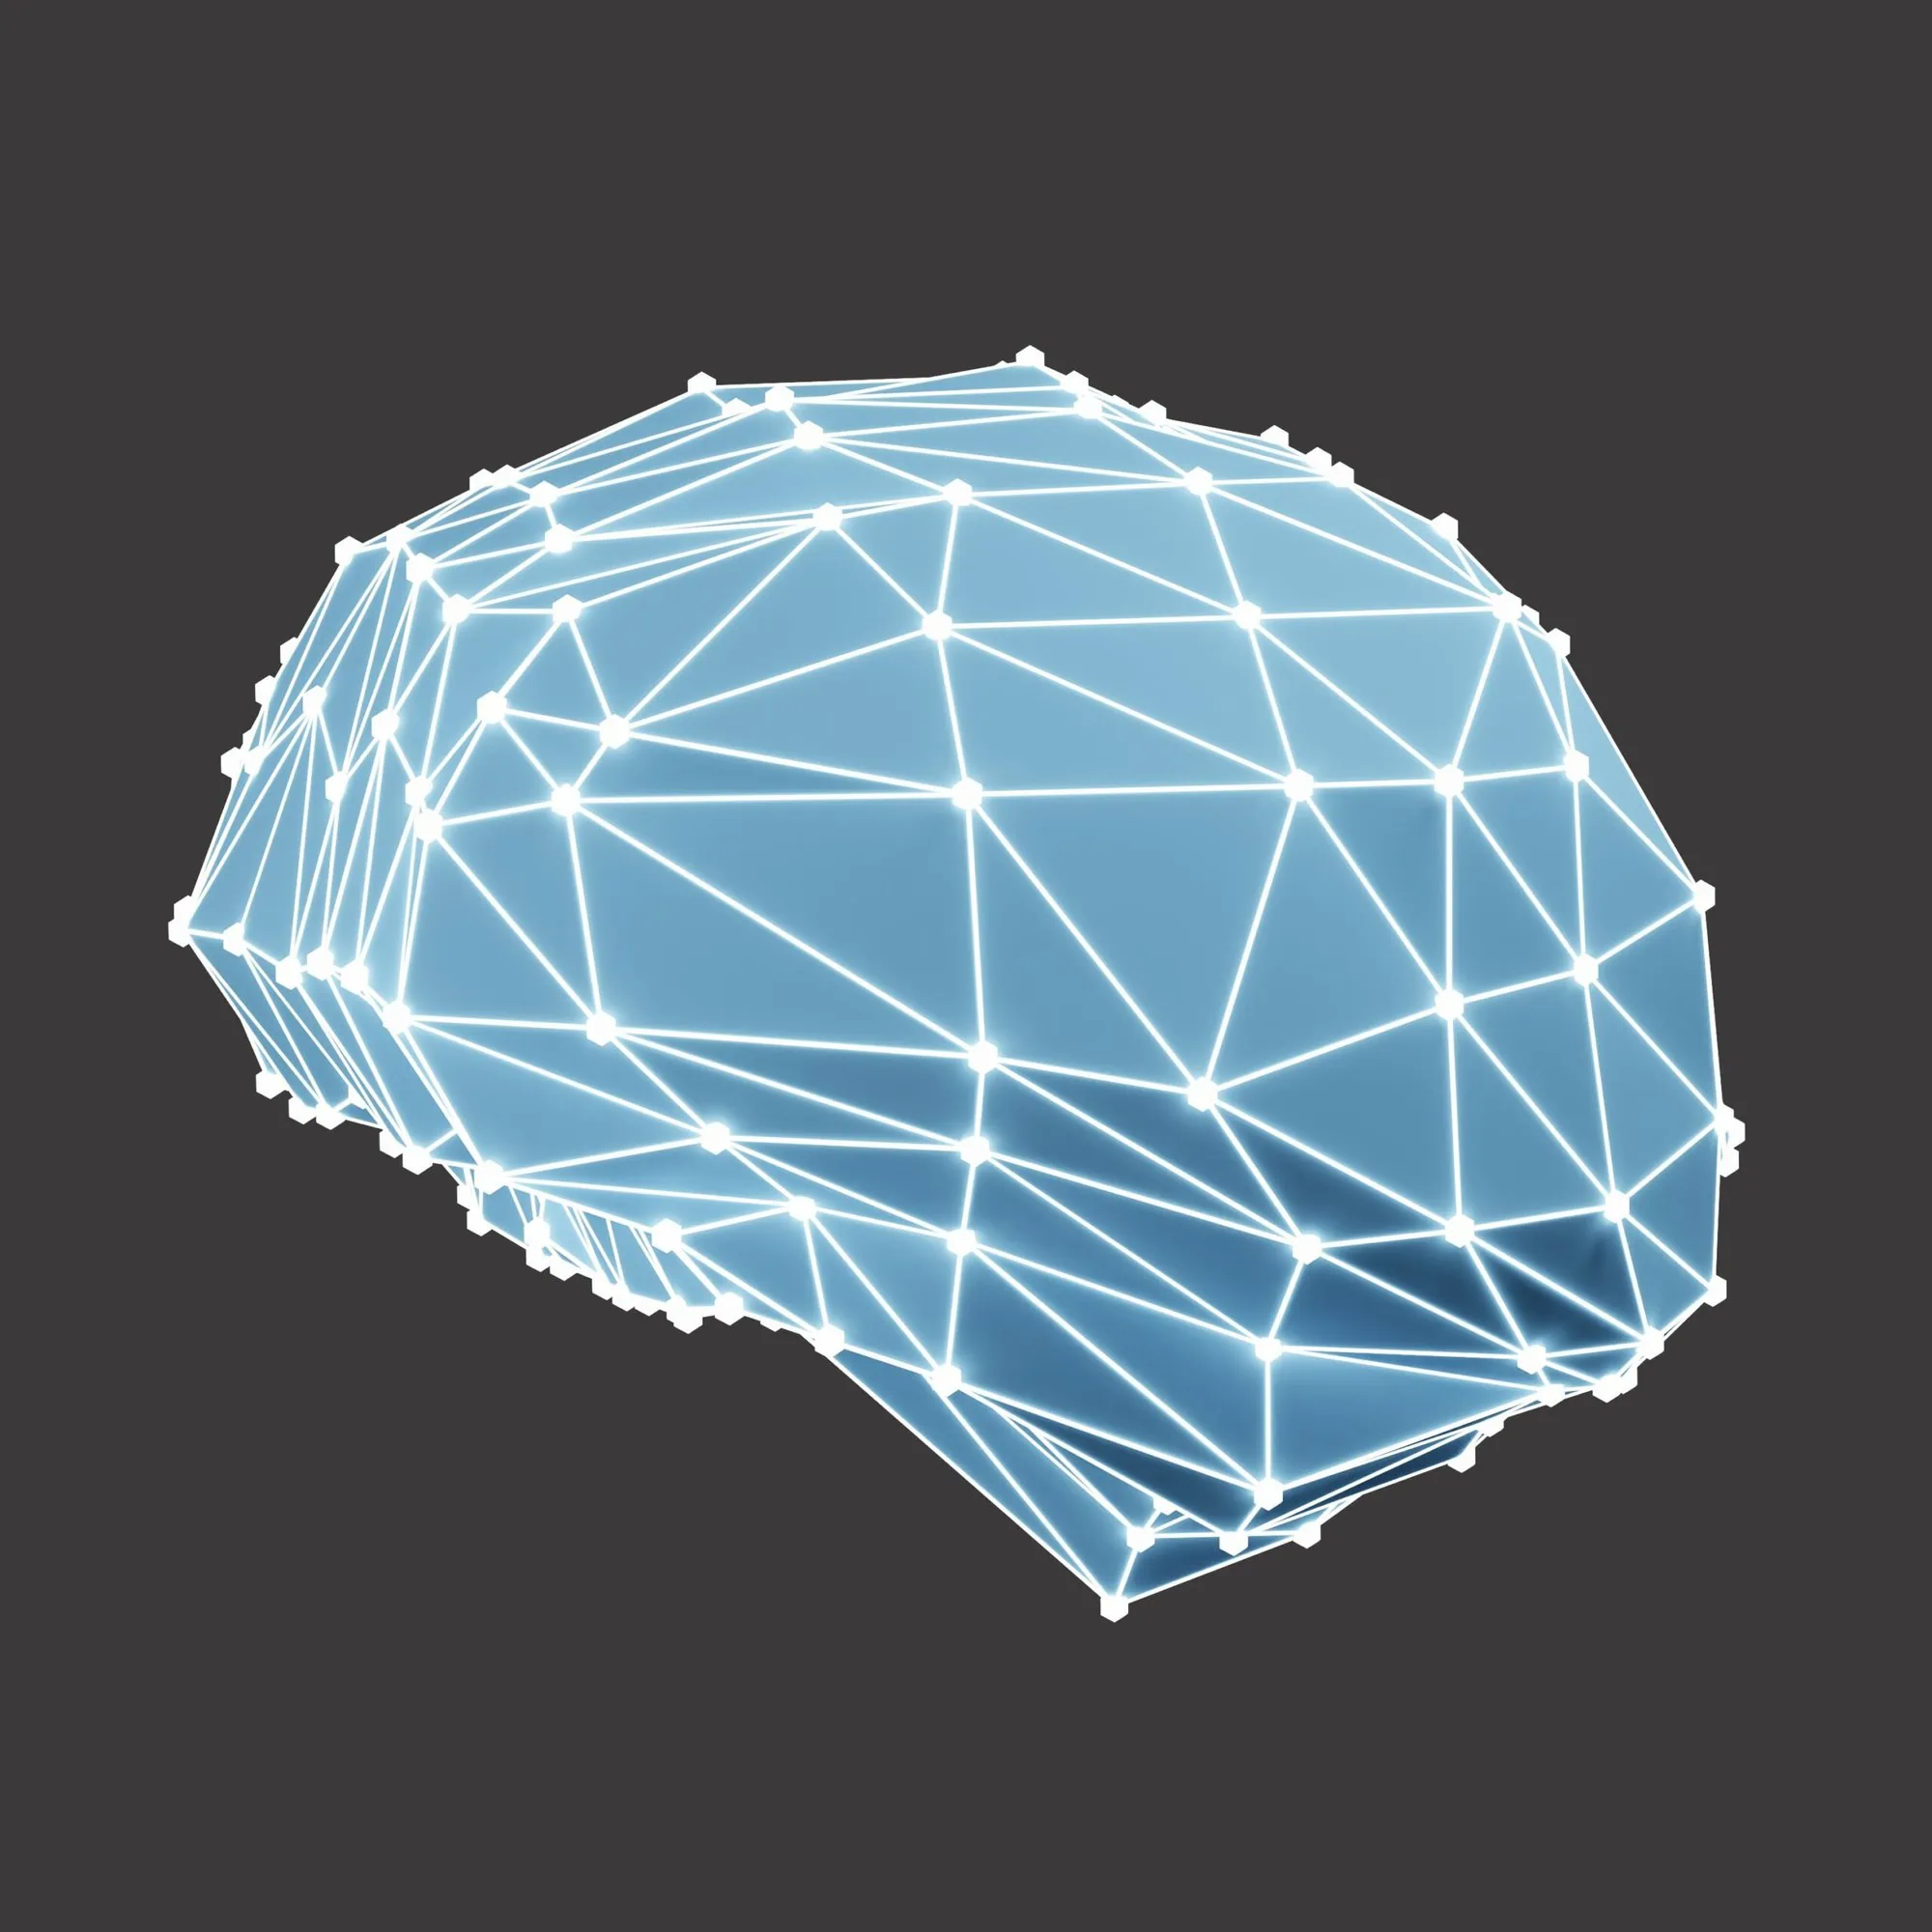 Brain with grid on it symbolizing AI security systems